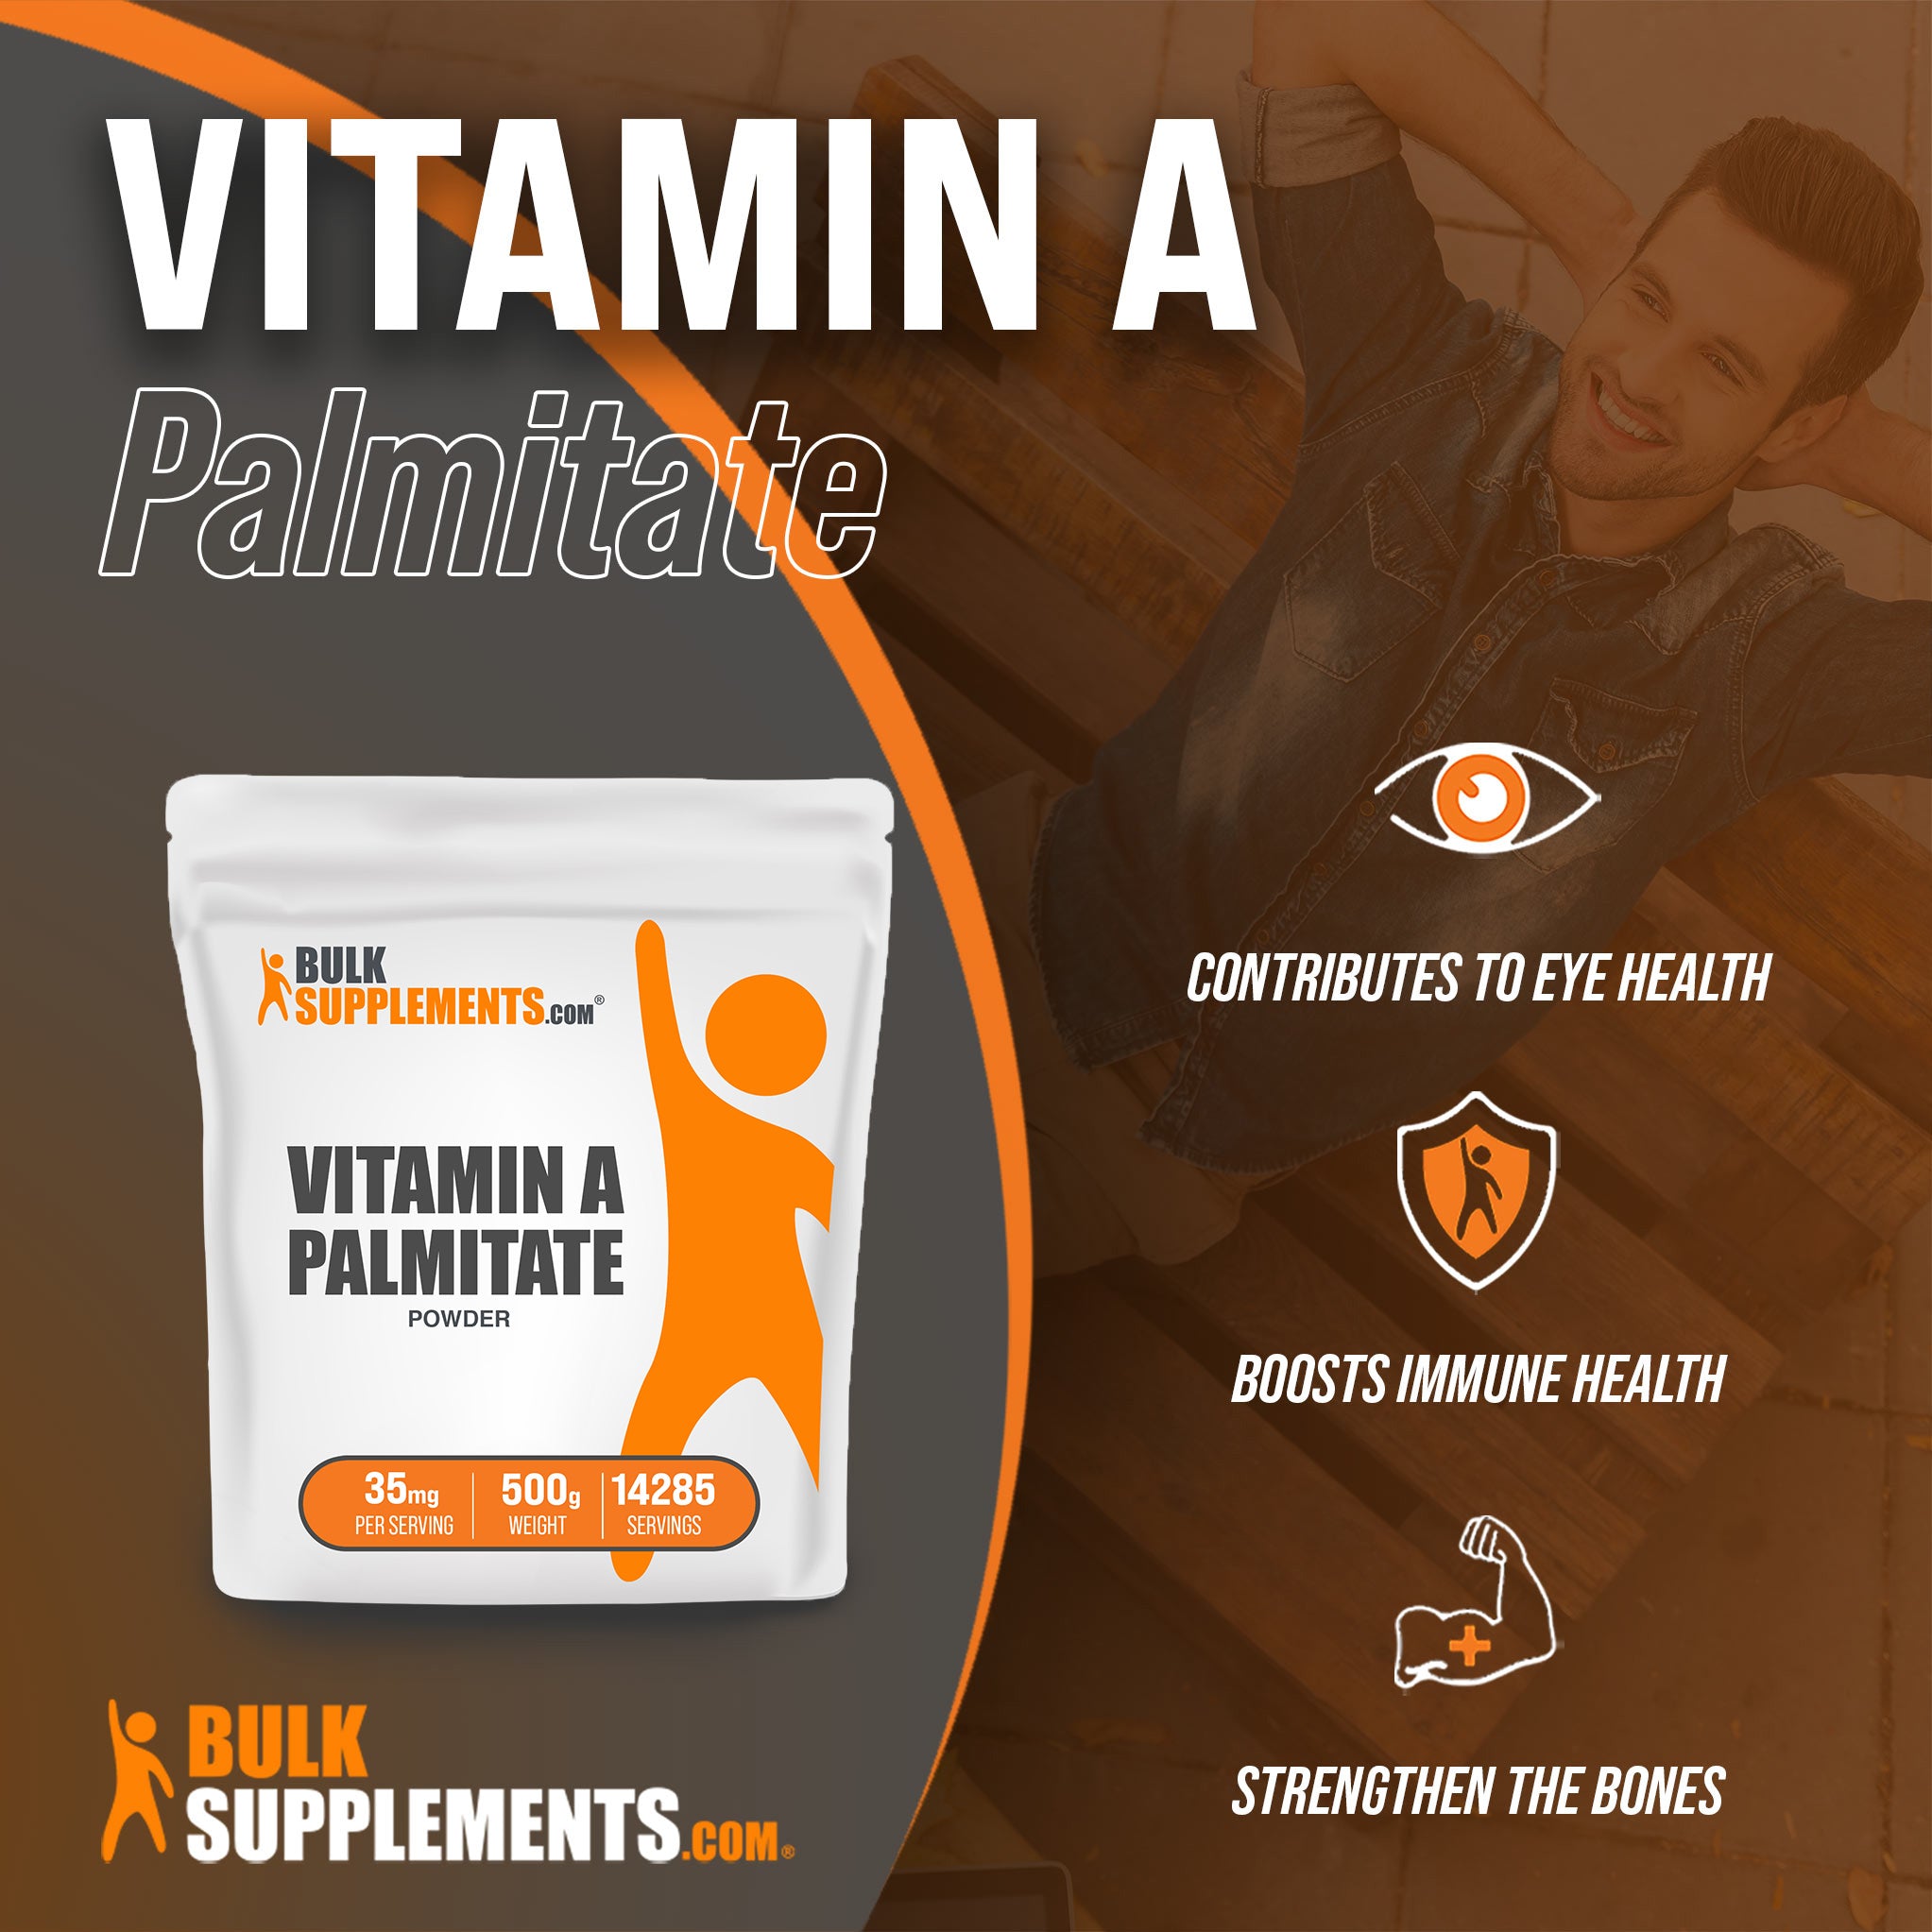 Benefits of Vitamin A Palmitate: contributes to eye health, boosts immune health, strengthen the bones